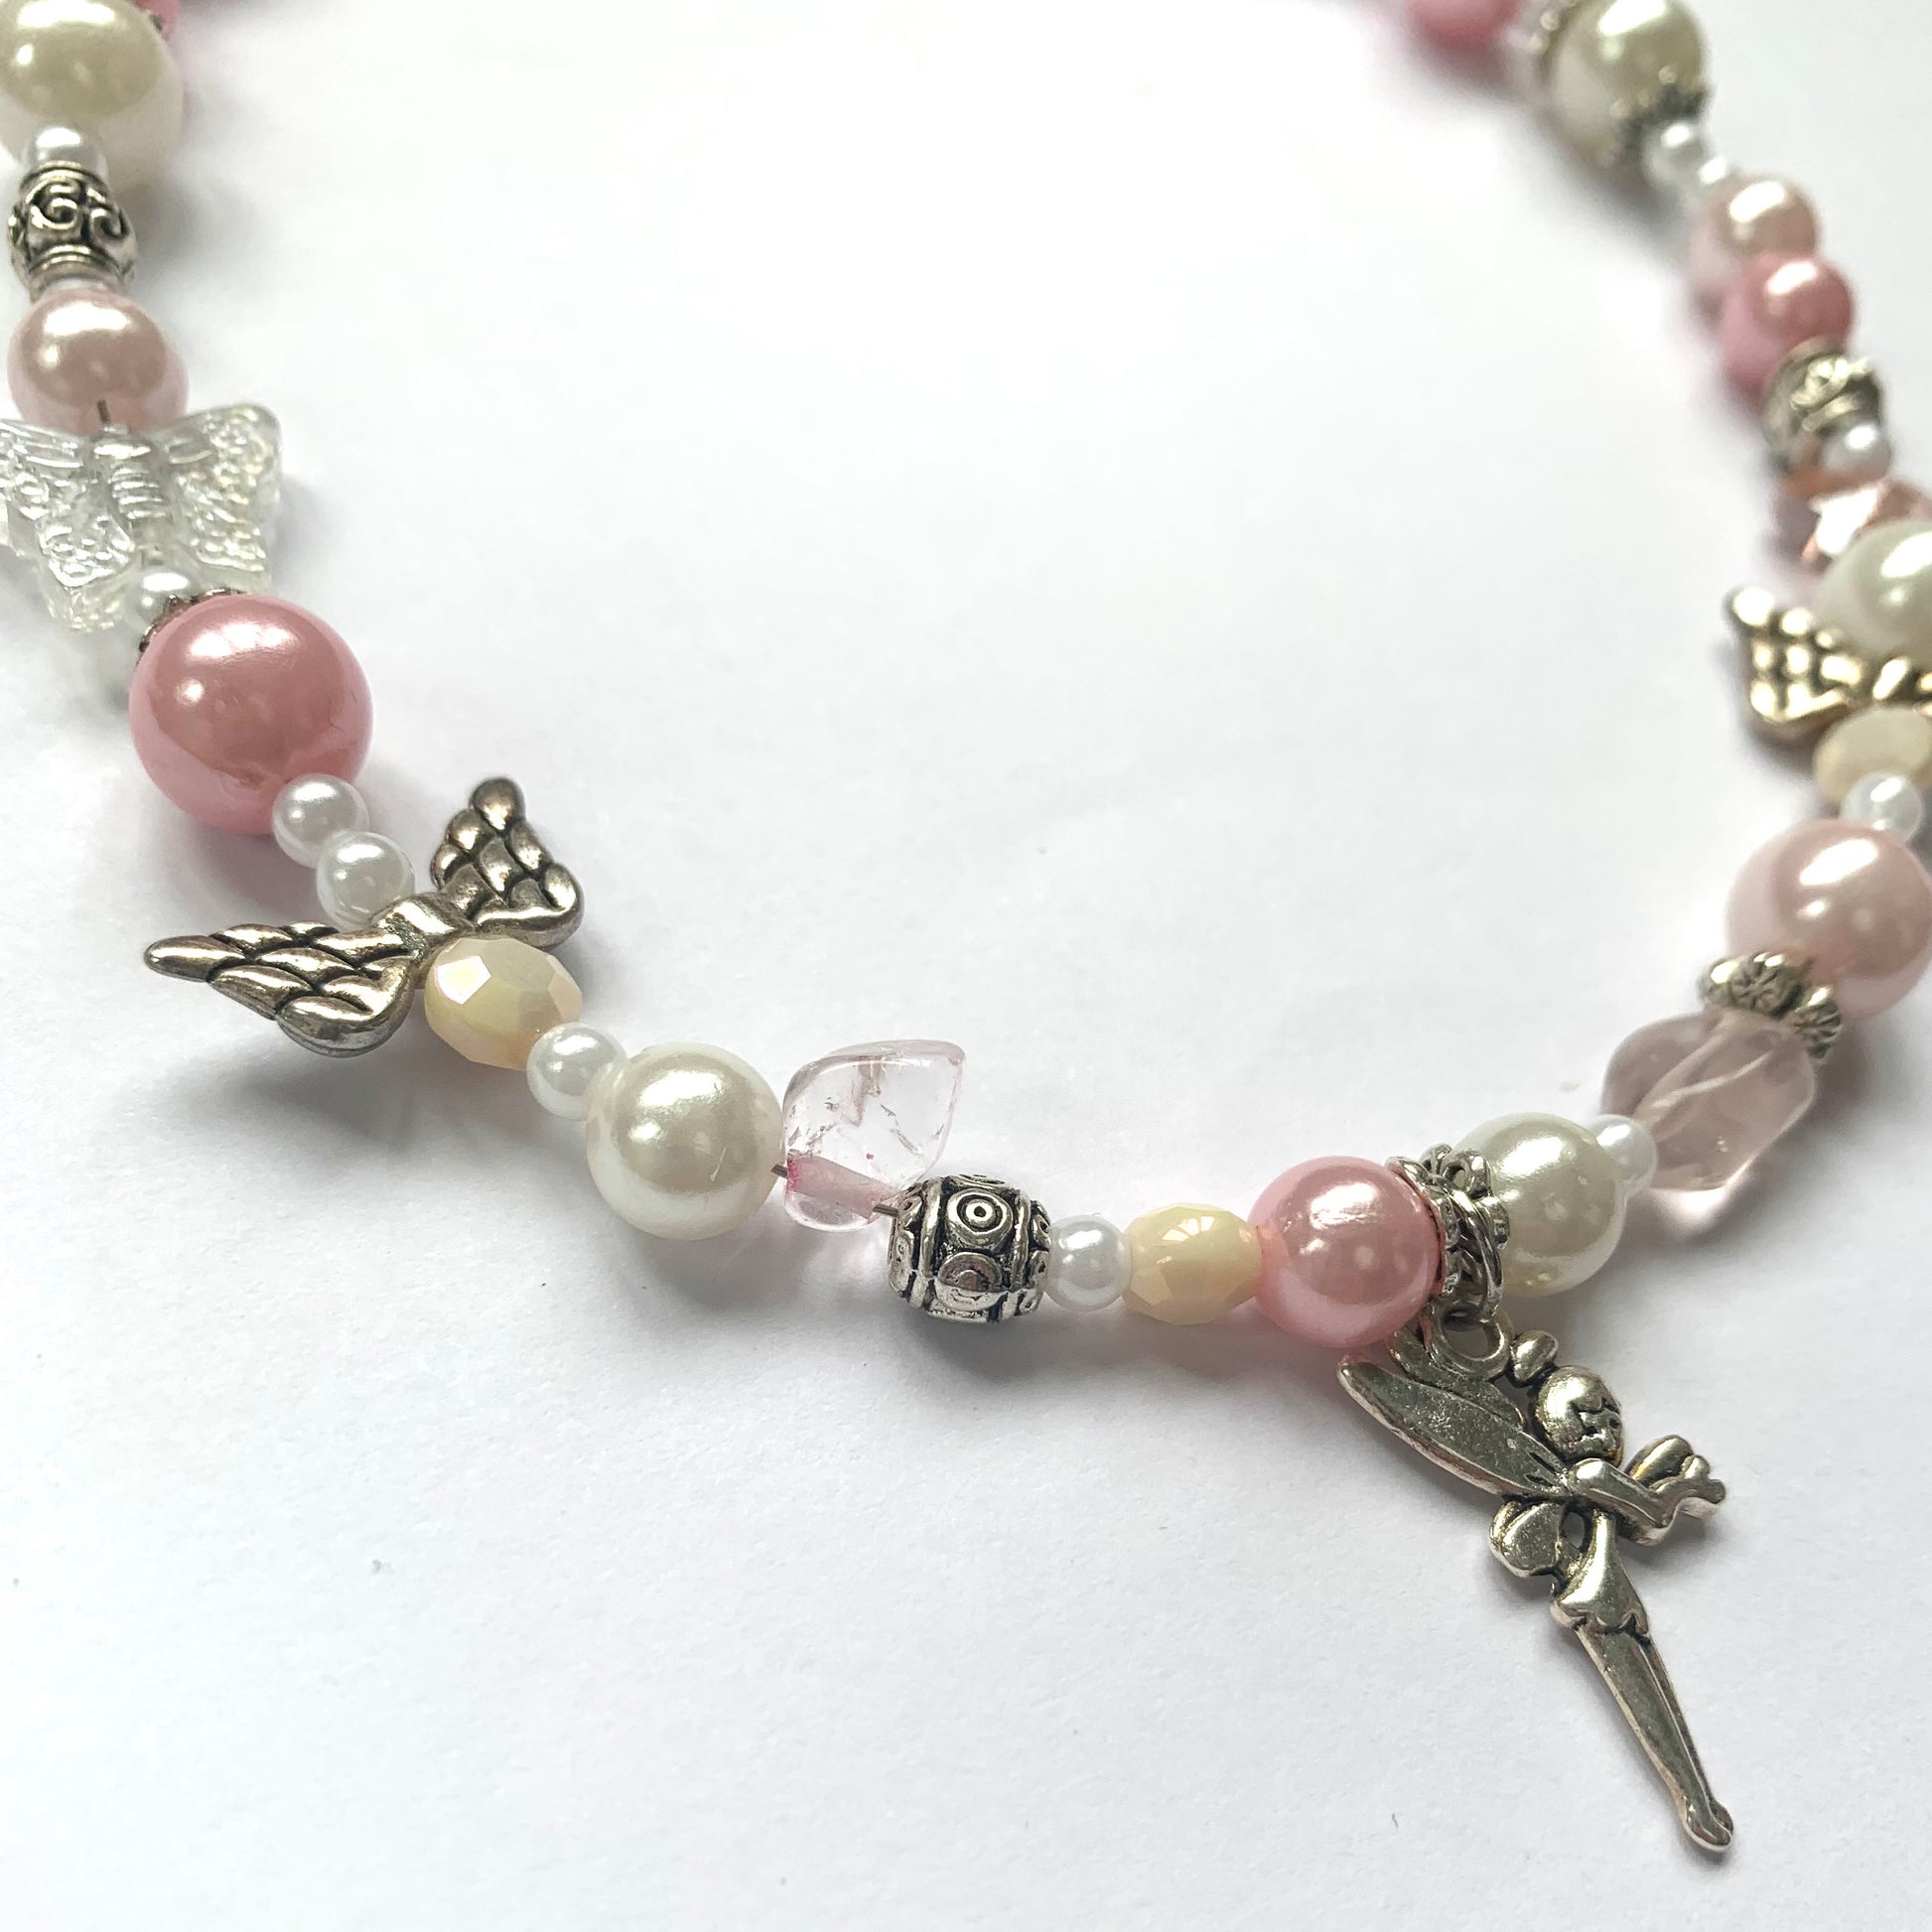 Close-up of a beaded Pretty in Pink necklace with an add-on fairy charm by SisBling.